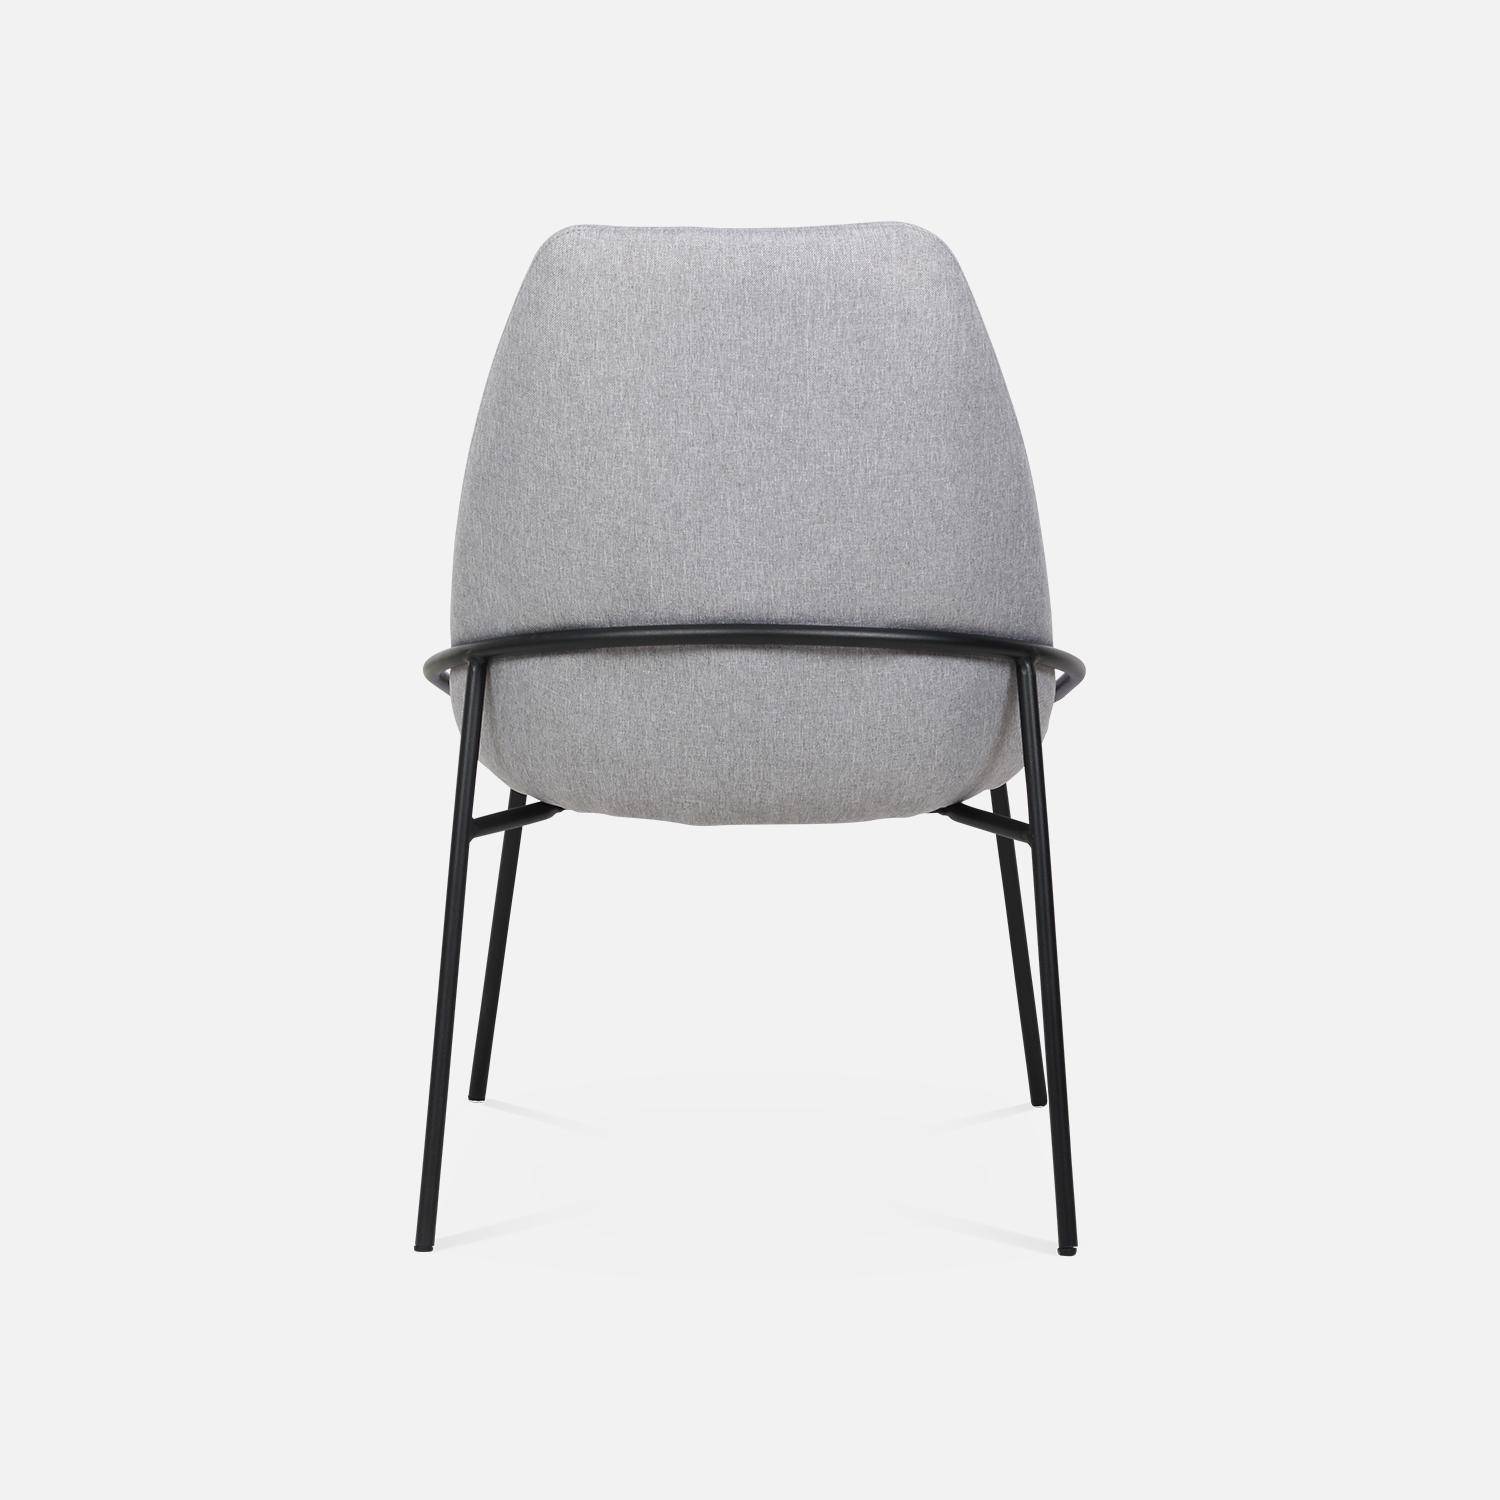 Retro-style metal and upholstered chair, 56.5x63x82.5cm, Lisbet, Light Grey Photo6